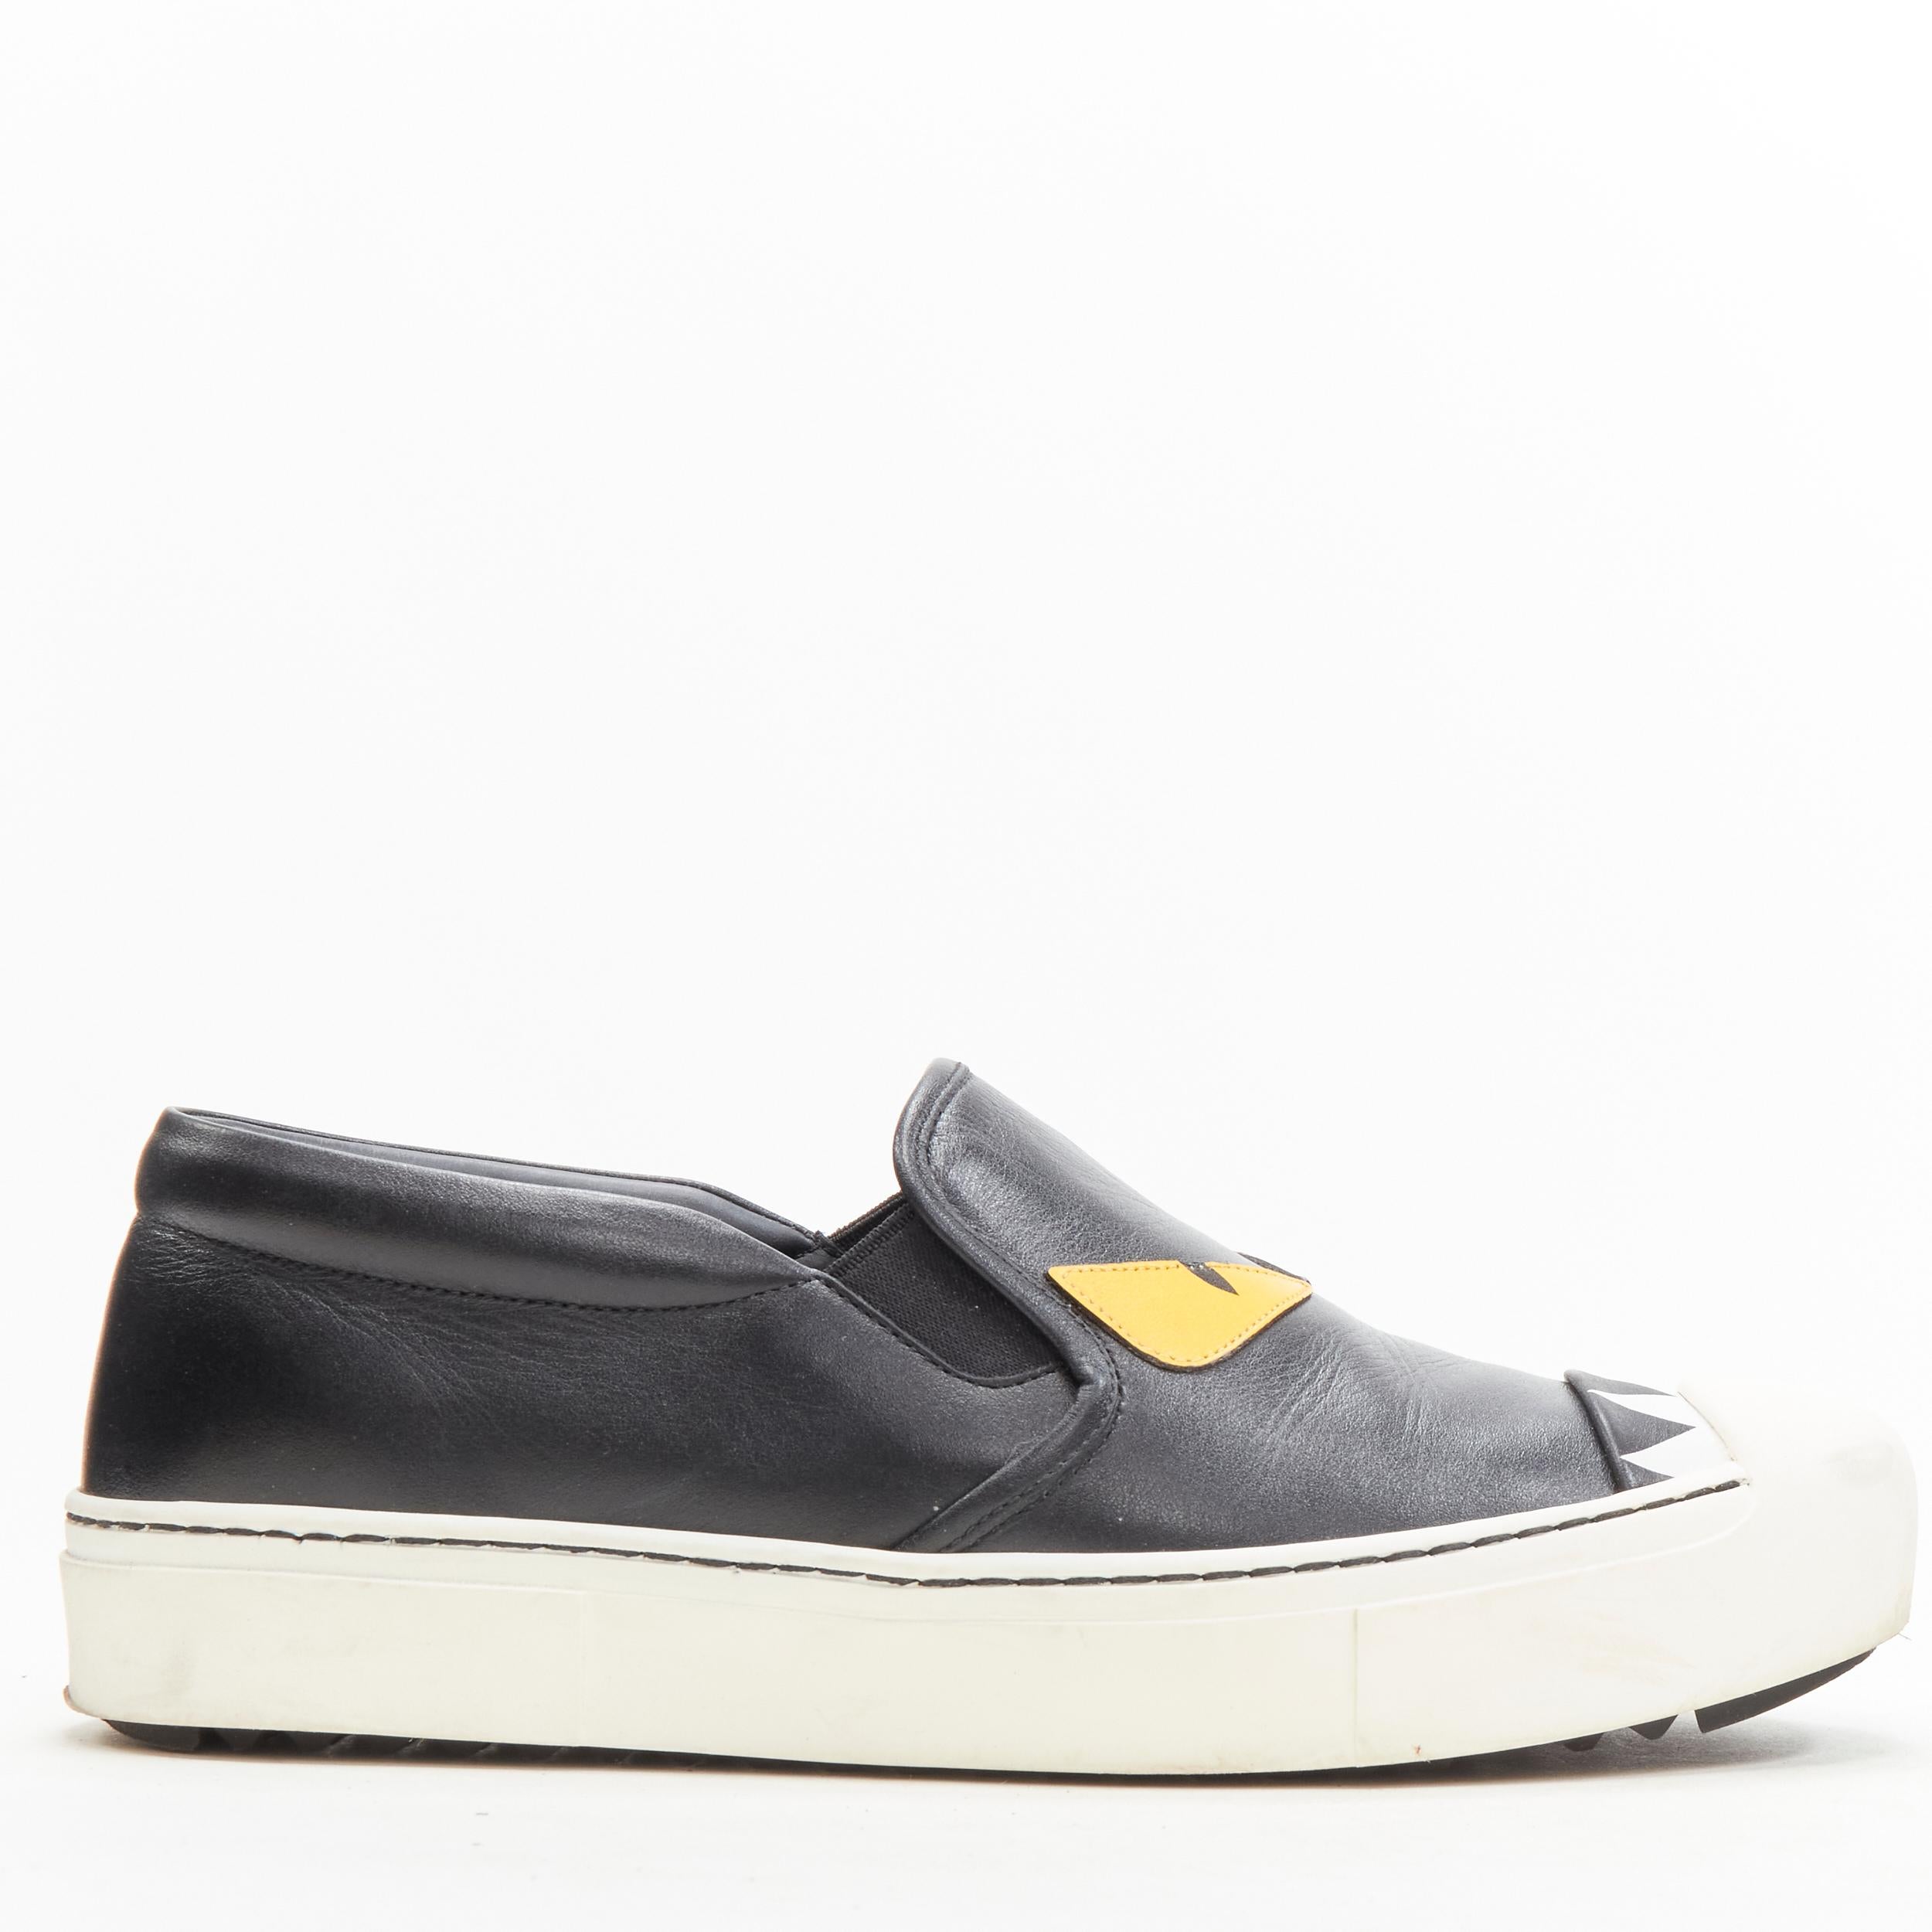 FENDI Monster Bug Eye black yellow leather slip on skate sneakers shoes EU36.5 
Reference: ANWU/A00344 
Brand: Fendi 
Collection: Monster Eye 
Material: Leather 
Color: Black 
Pattern: Solid 
Extra Detail: White rubber outsole with FENDI Roma logo